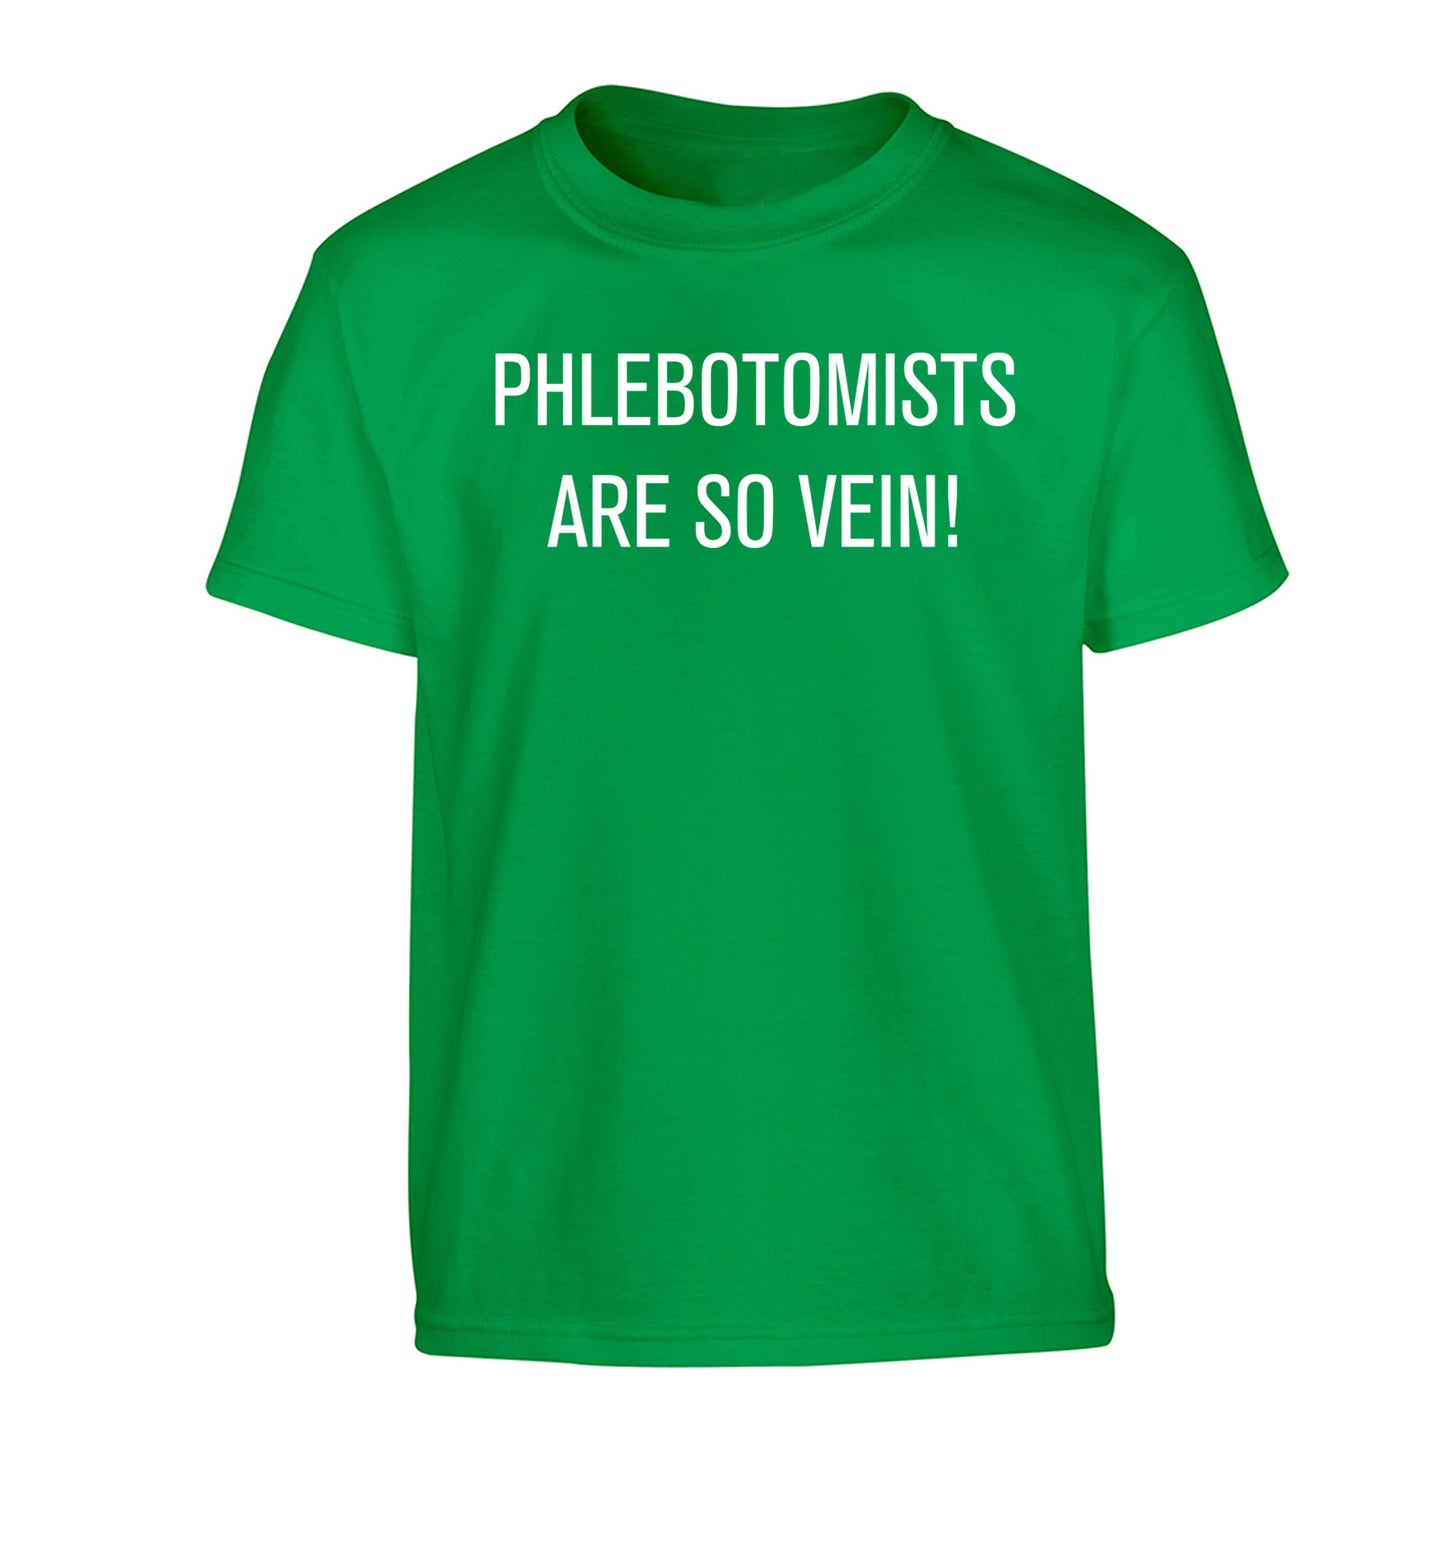 Phlebotomists are so vein! Children's green Tshirt 12-14 Years